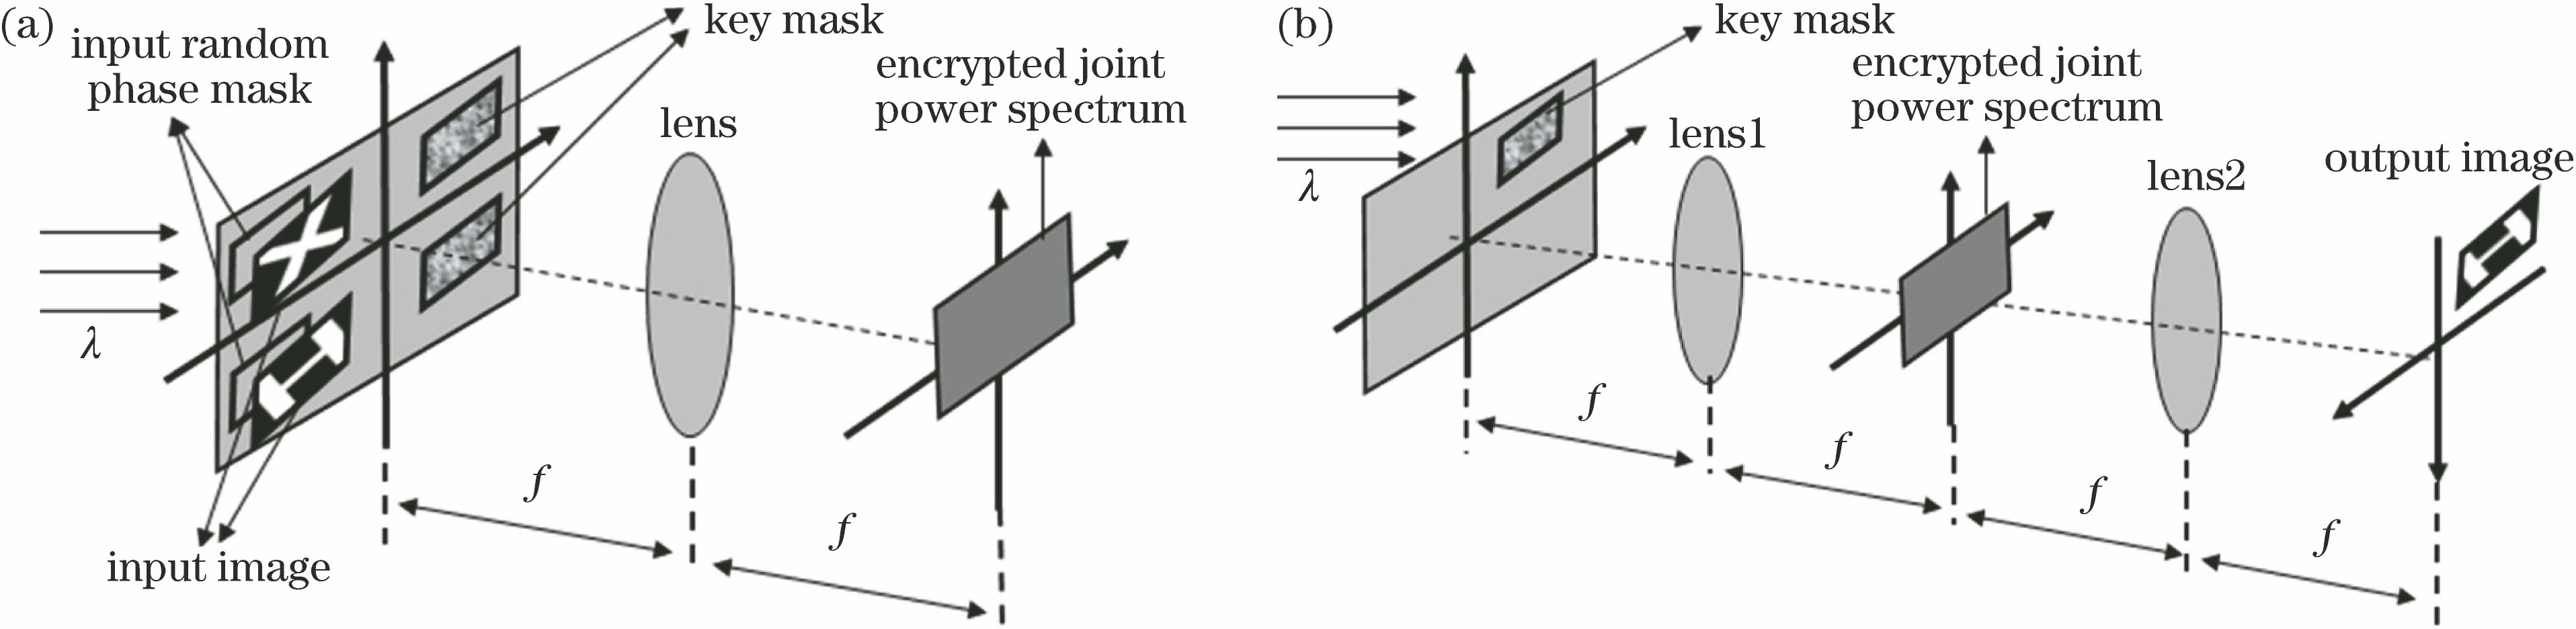 Schematic of parallel encryption for multi-channel images based on JTC. (a) Encryption step; (b) decryption step